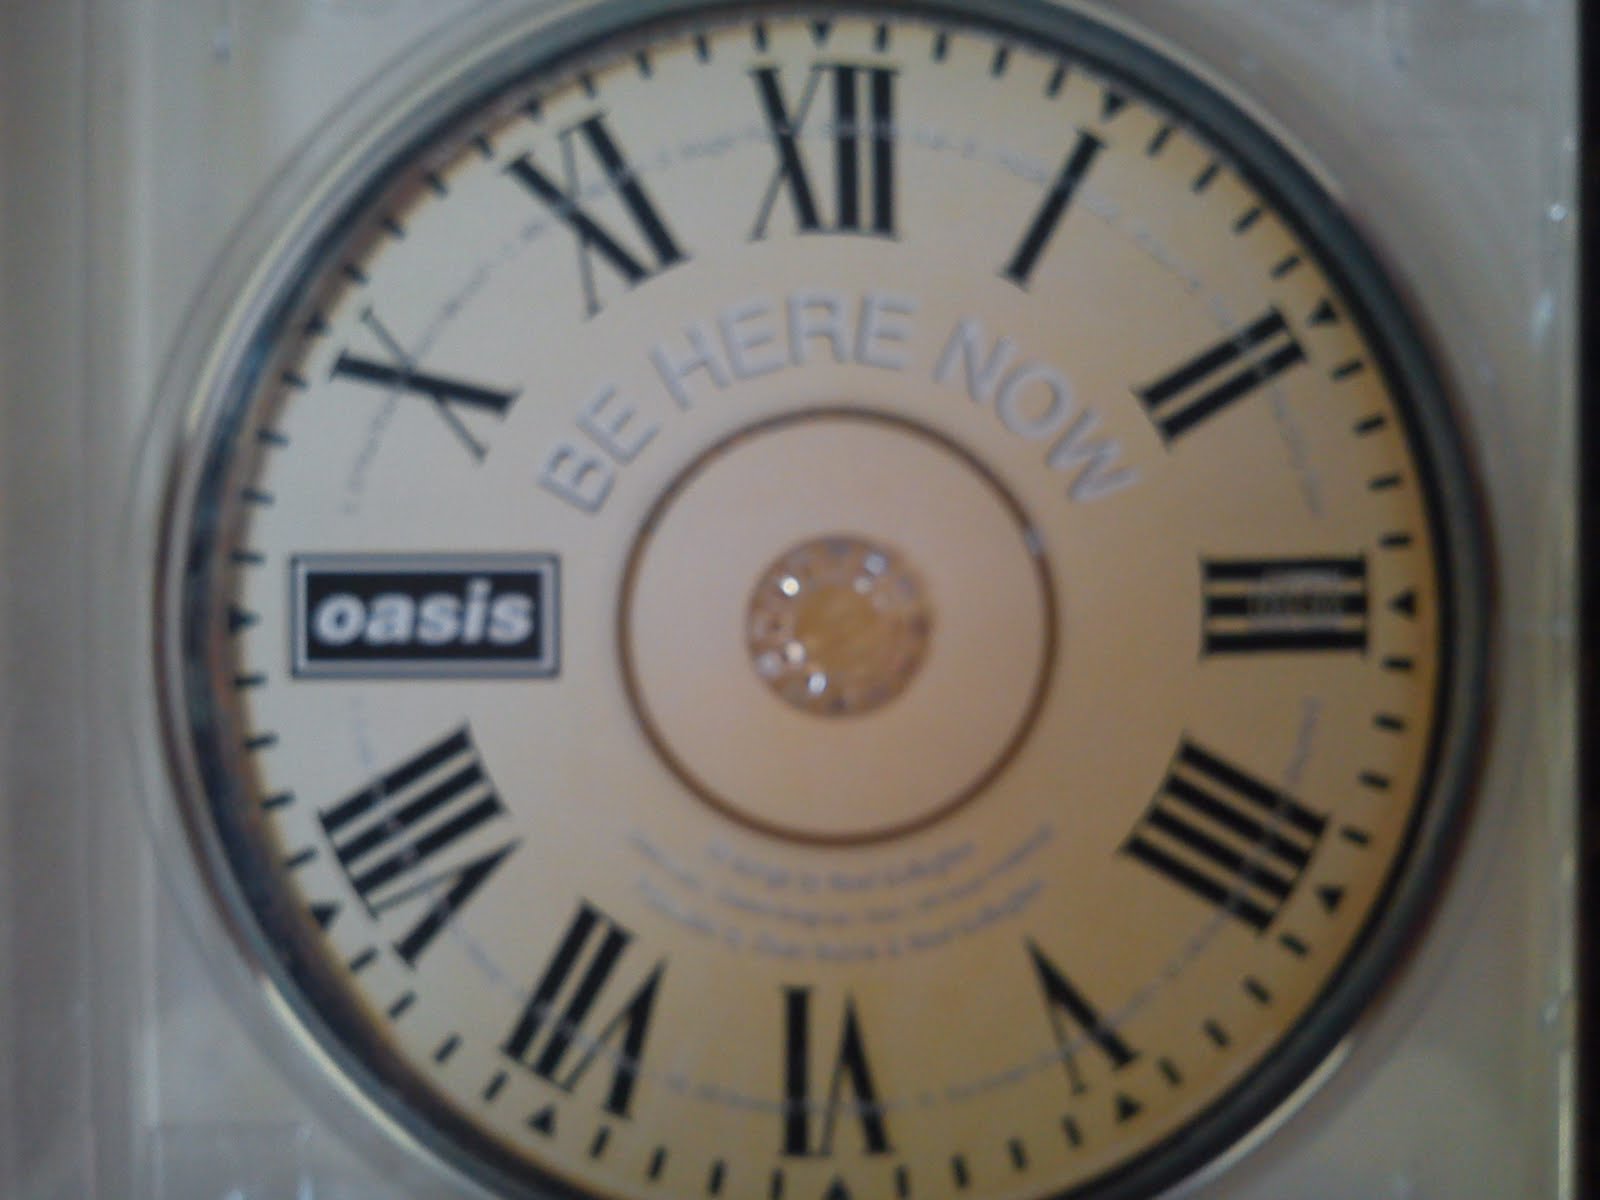 Oasis Be Here Now Revisited 16 Years On God Is In The Tv